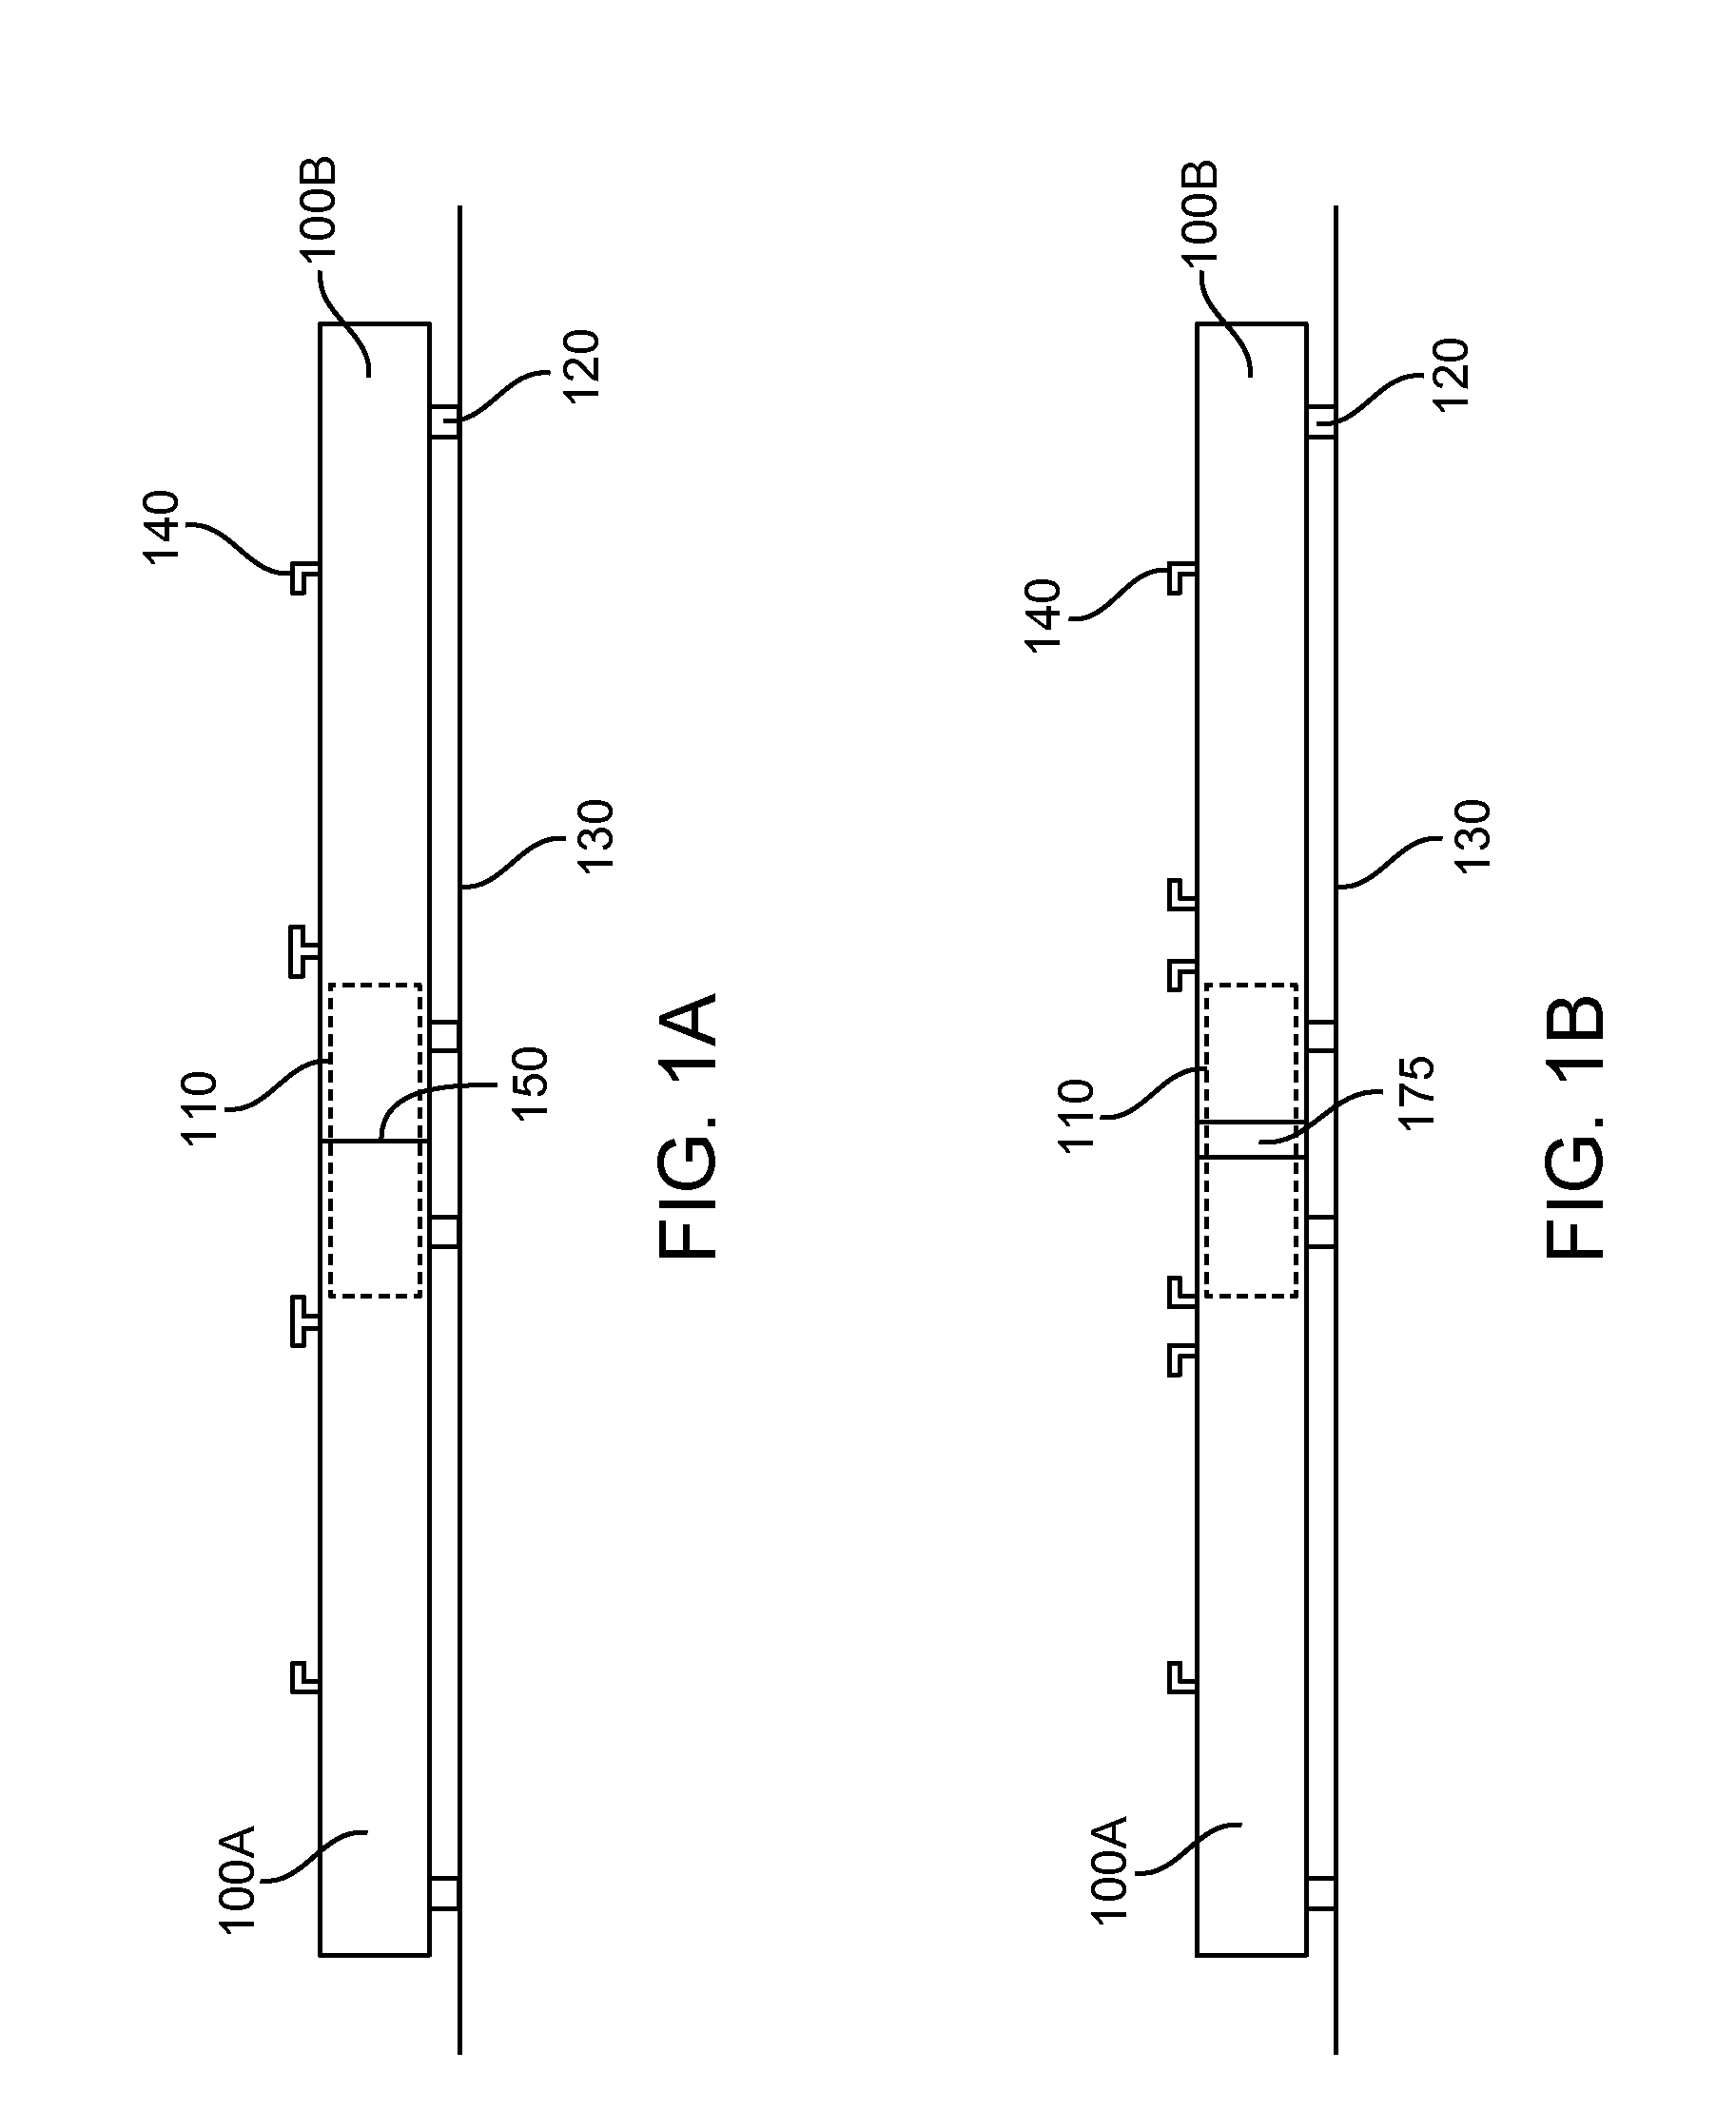 Systems and methods for splicing solar panel racks